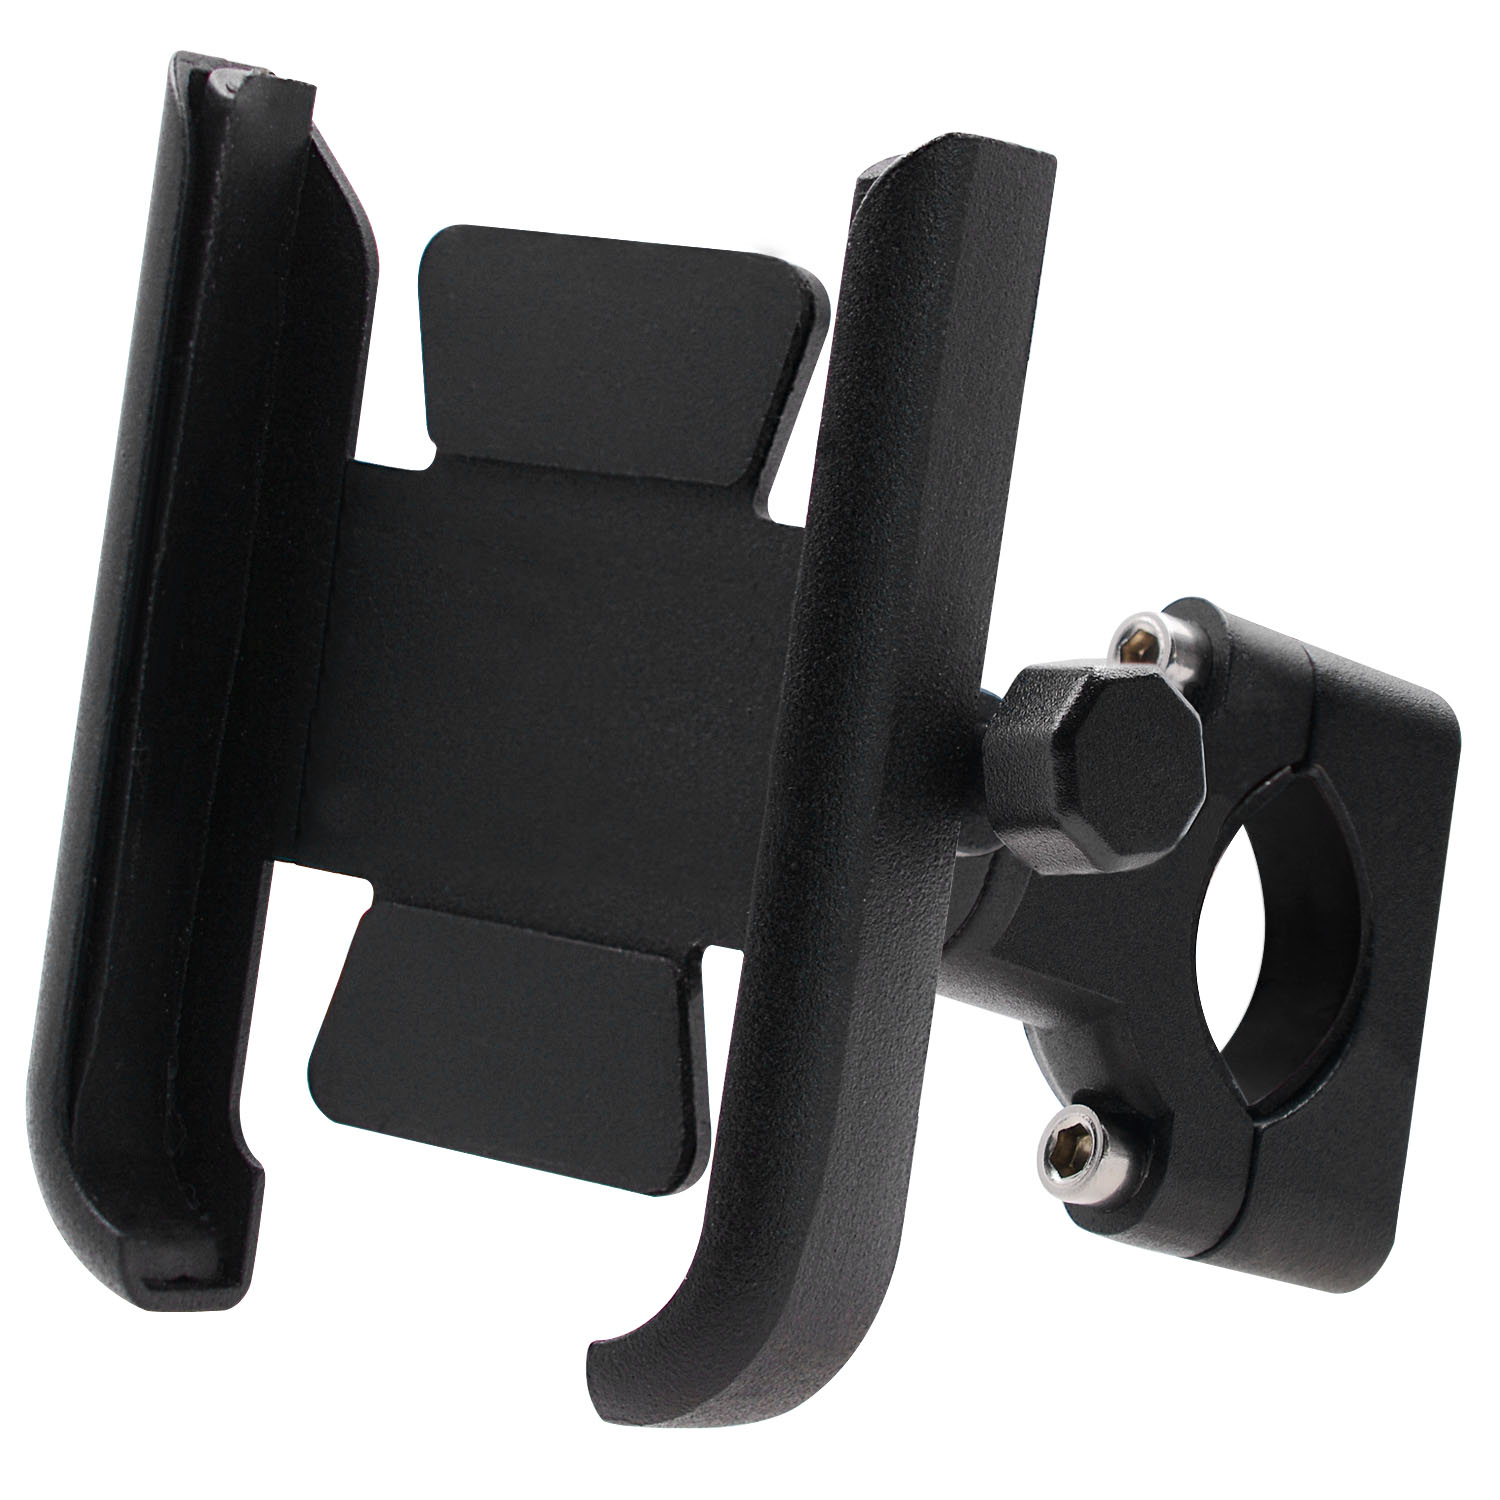 4-6.5Inch Handlebar Mirror 360 Degree Rotation Motorcycle Bicycle Mount Holder for GPS Mobile Phone